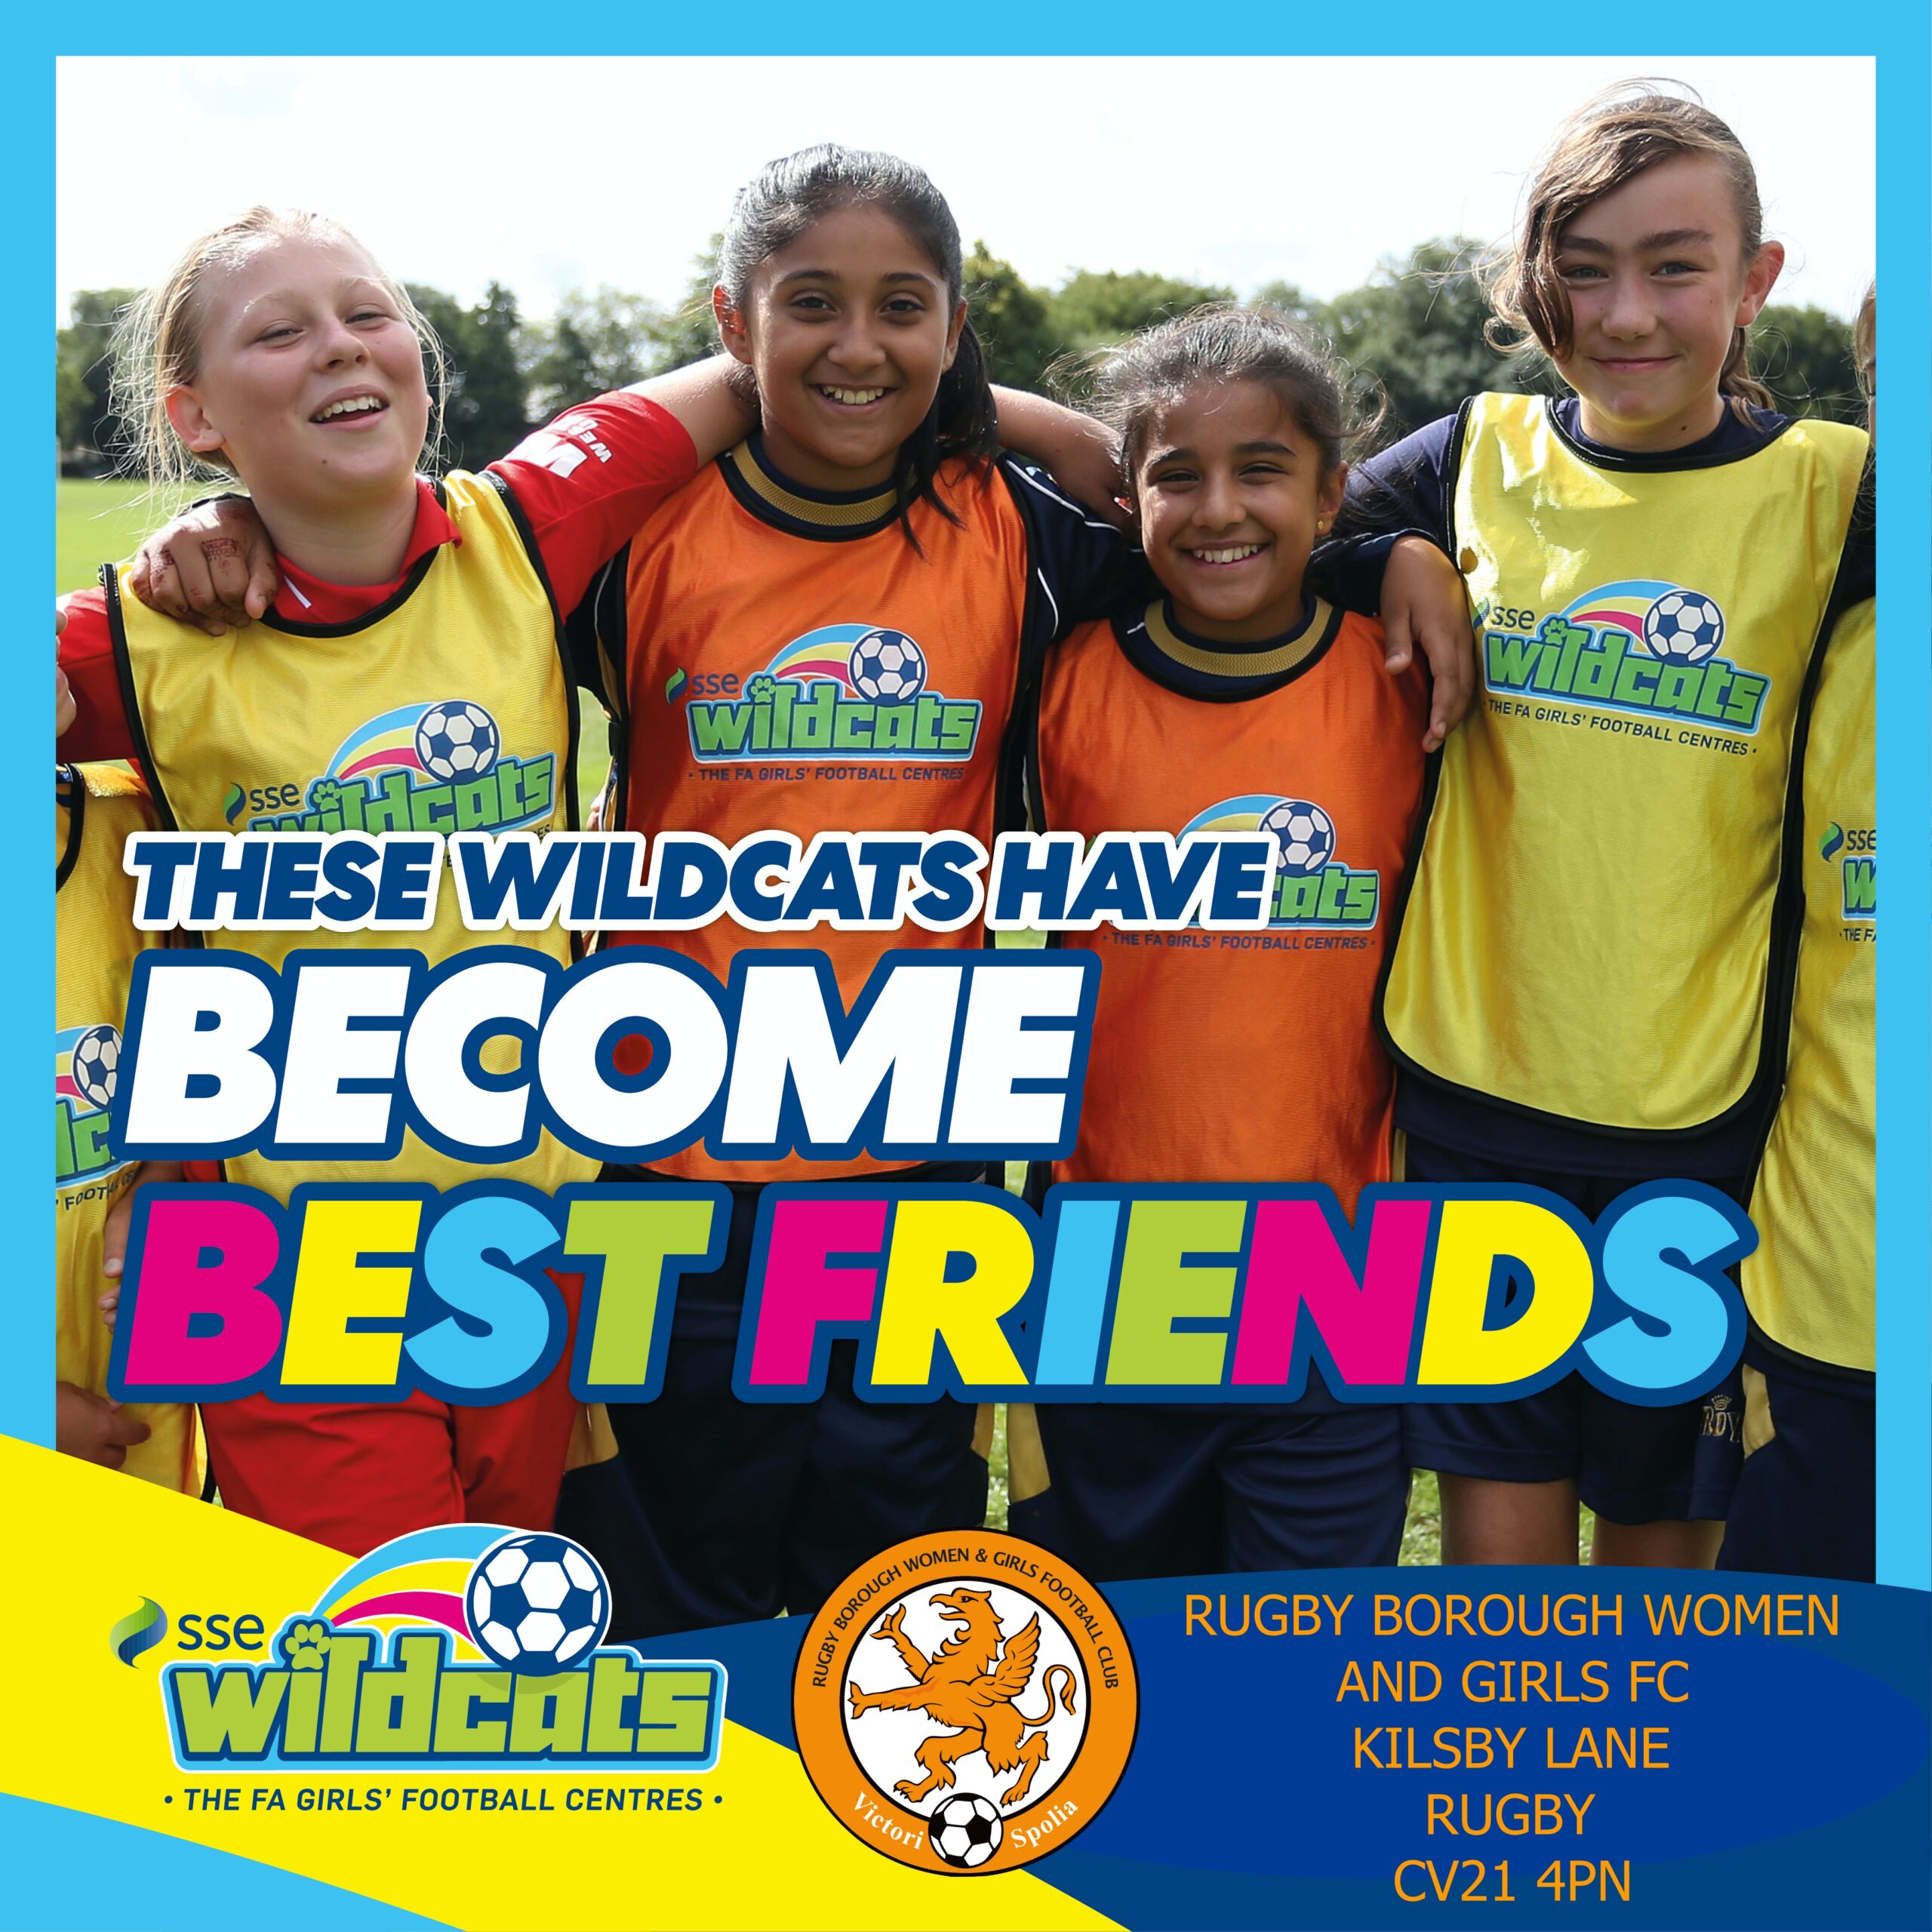 Wildcats Become Best Friends & Rugby Borough Women & Girls Promo post